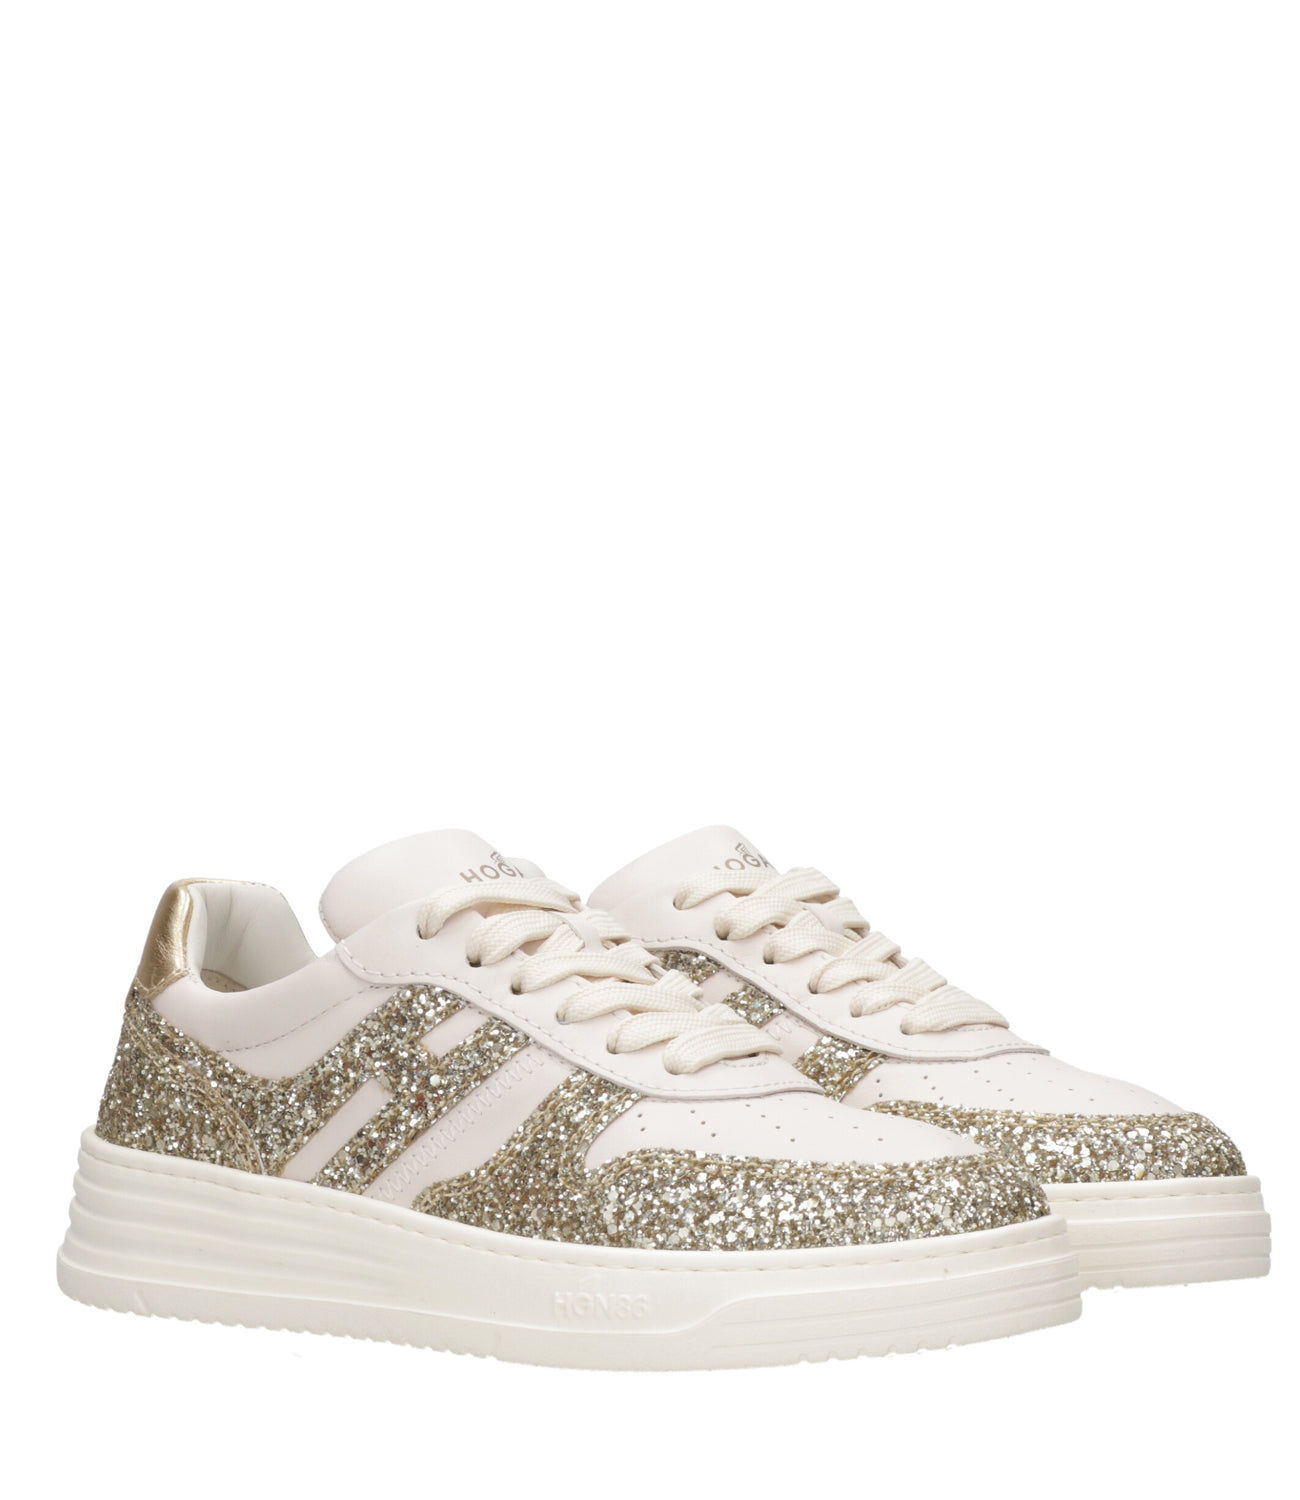 Hogan | Ivory and Gold Sneakers